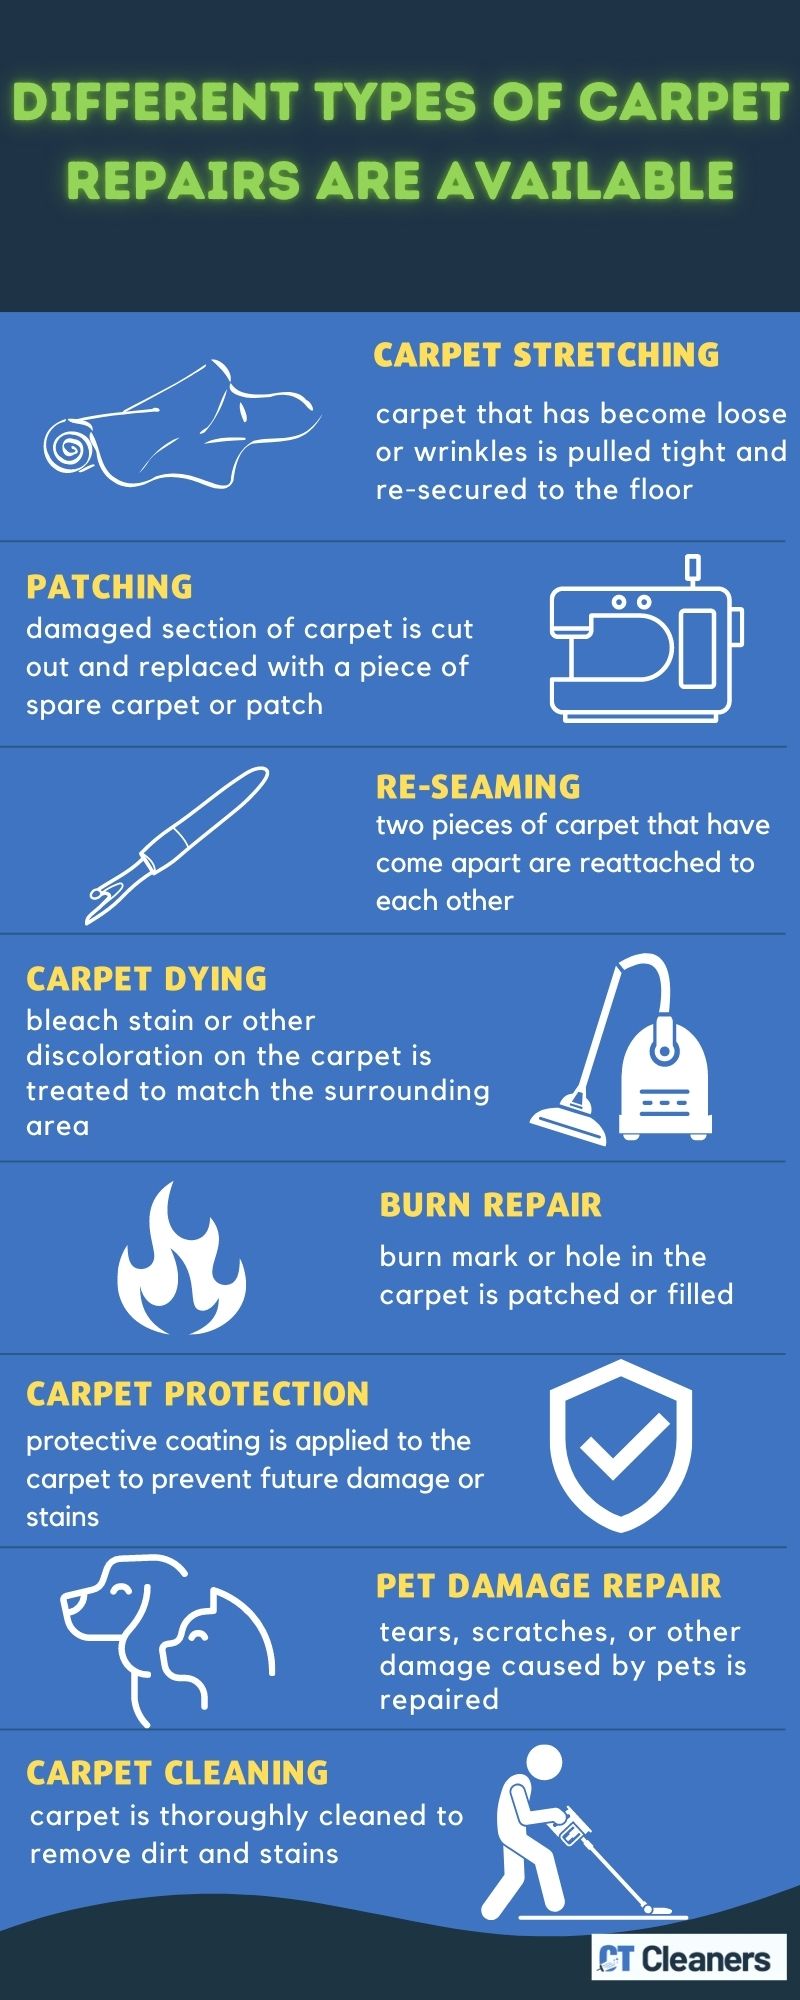 Different Types of Carpet Repairs are Available